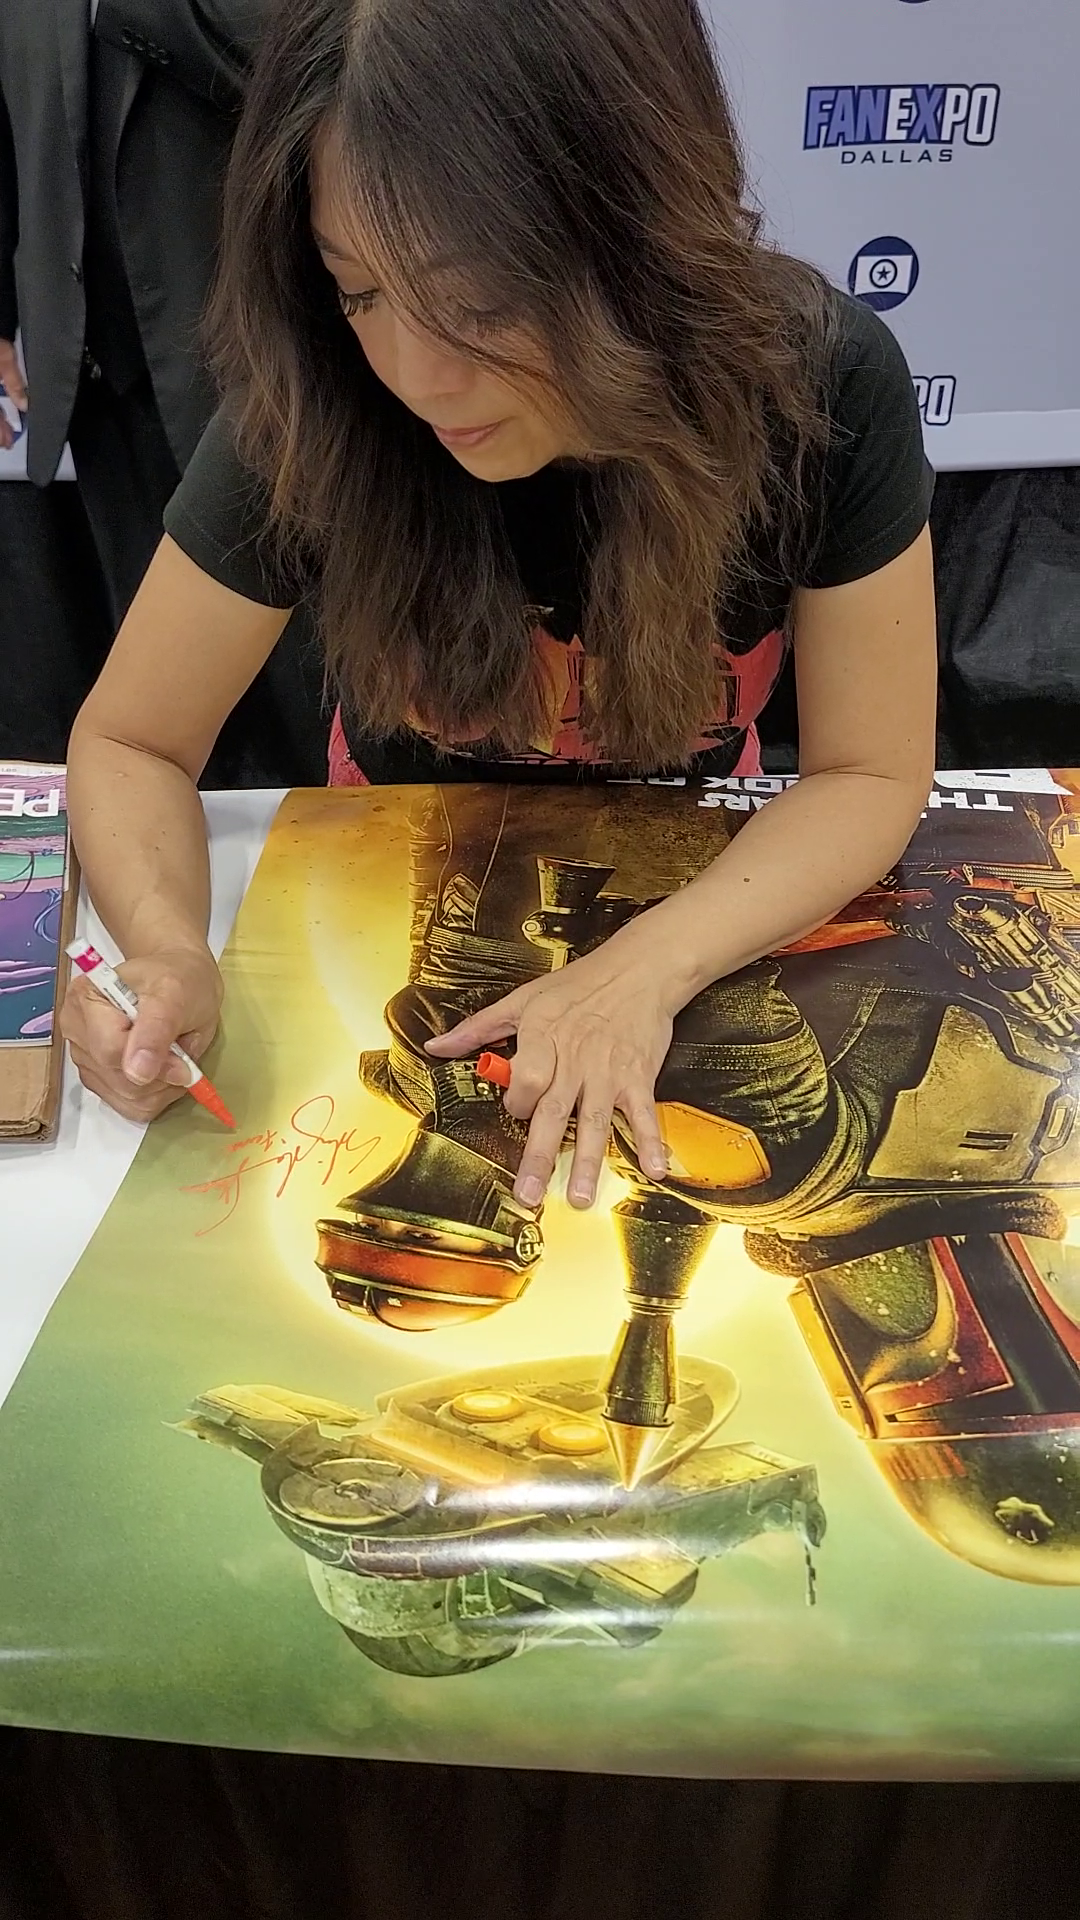 Fan Expo Dallas 2022 Ming-Na Wen Signing Autographs